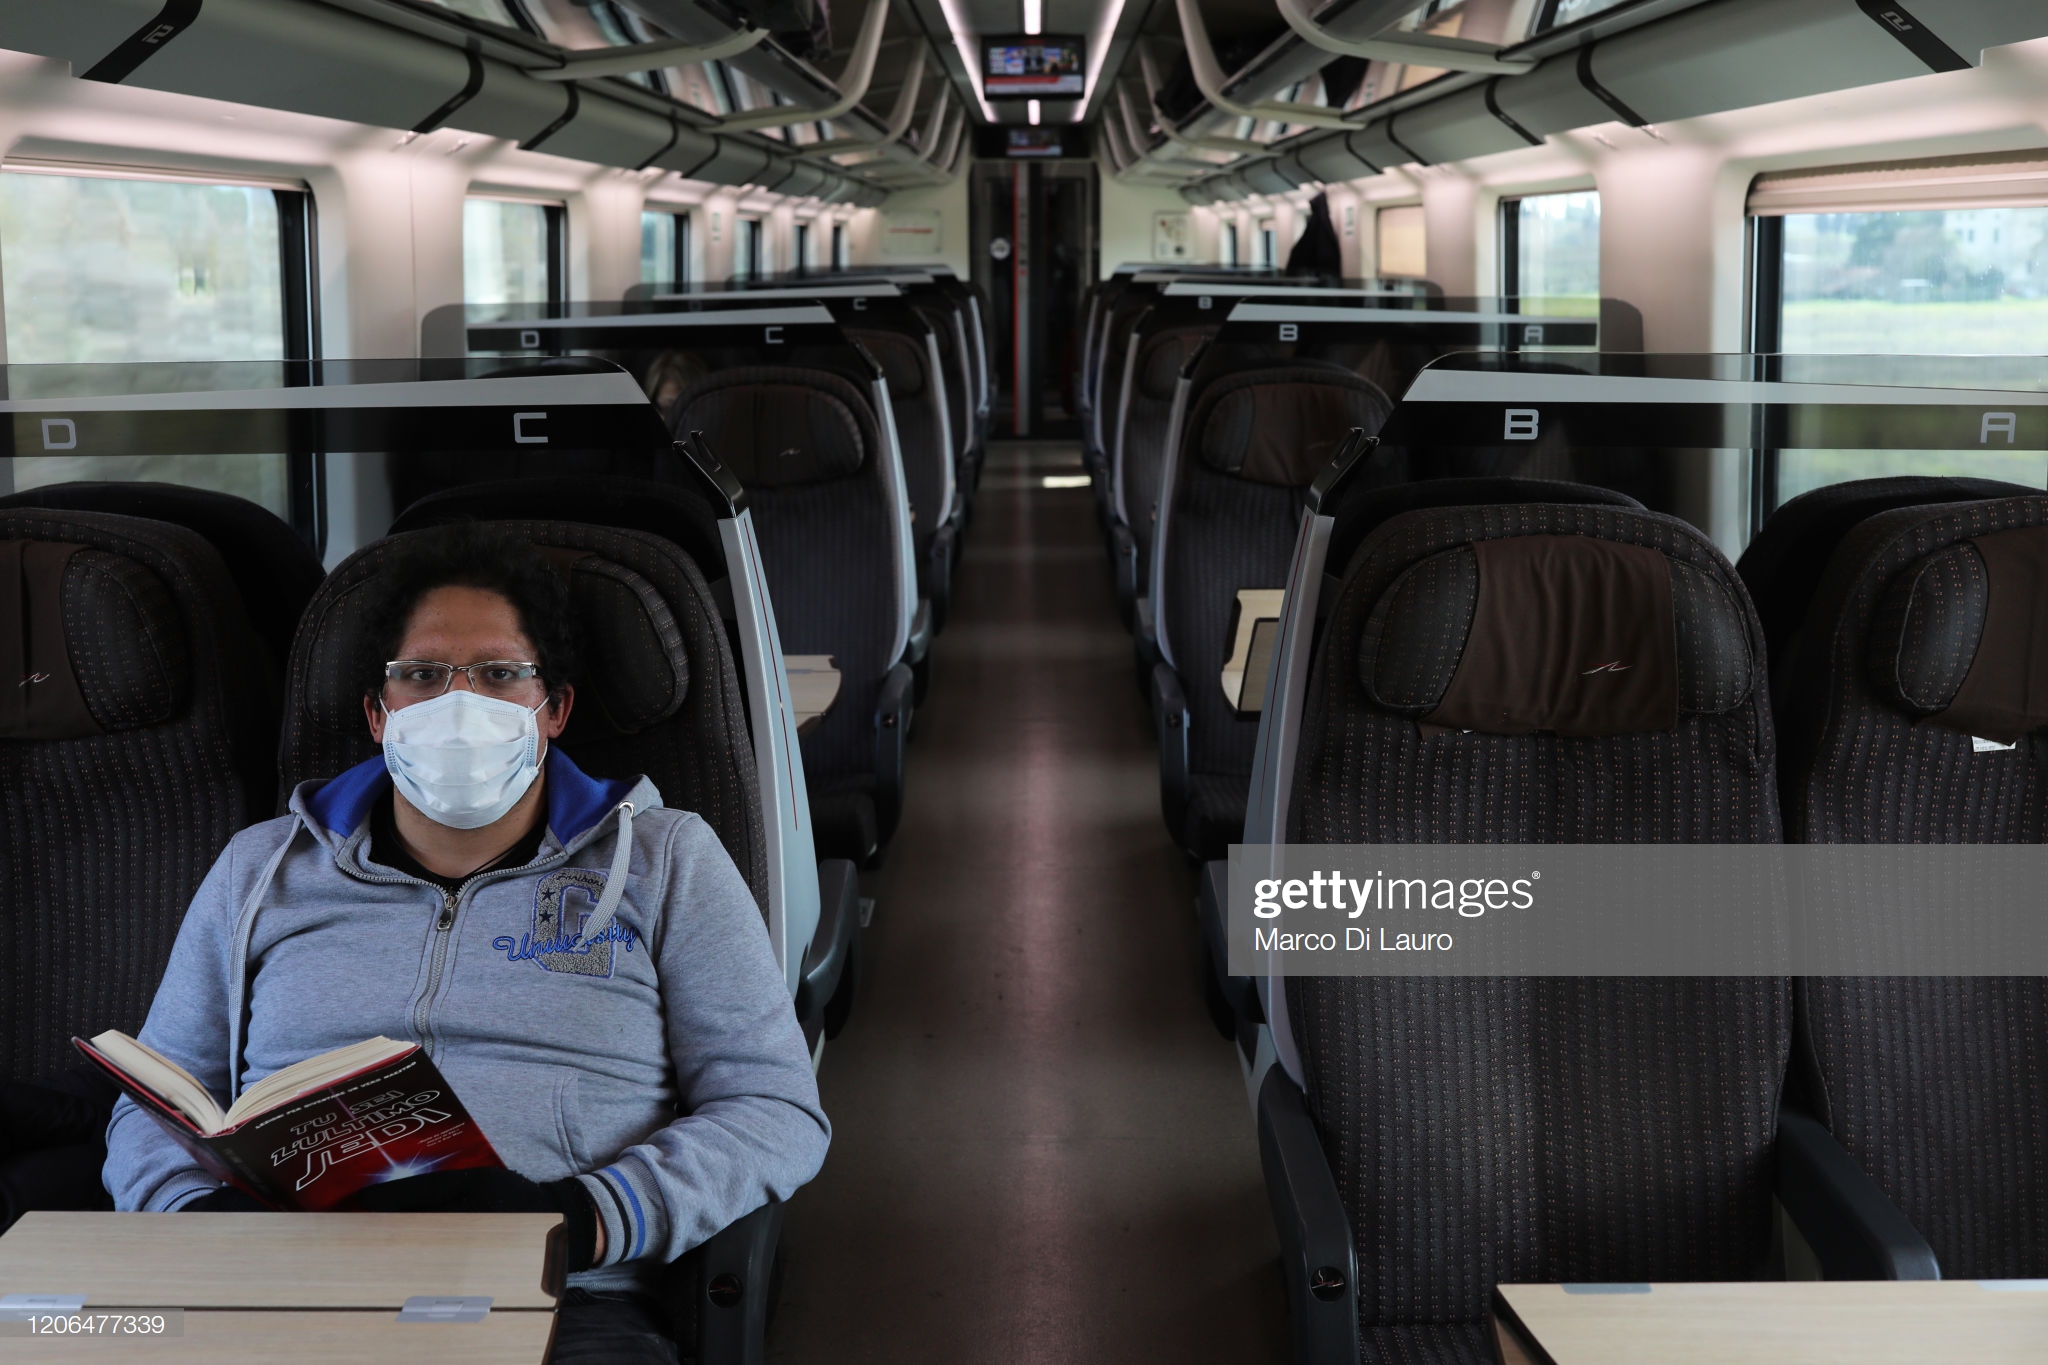 passenger-wearing-a-protective-mask-is-seen-on-the-train-leaving-the-picture-id1206477339